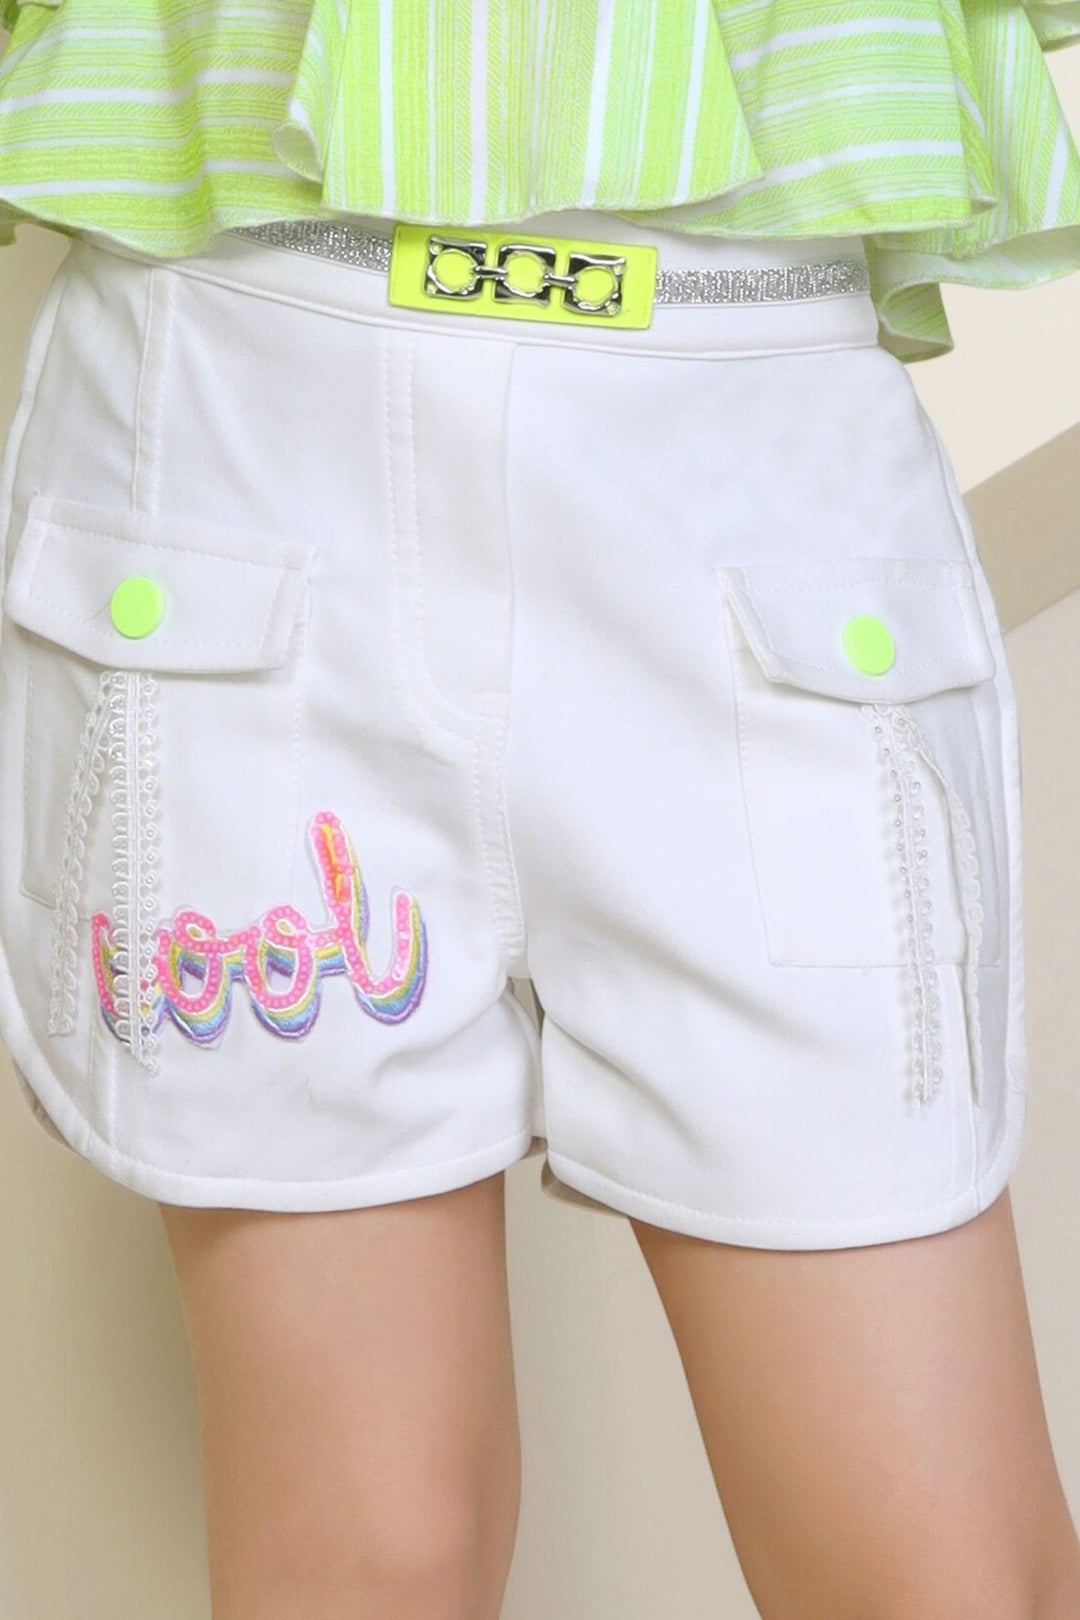 Green with White Printed Top and Shorts For Girls